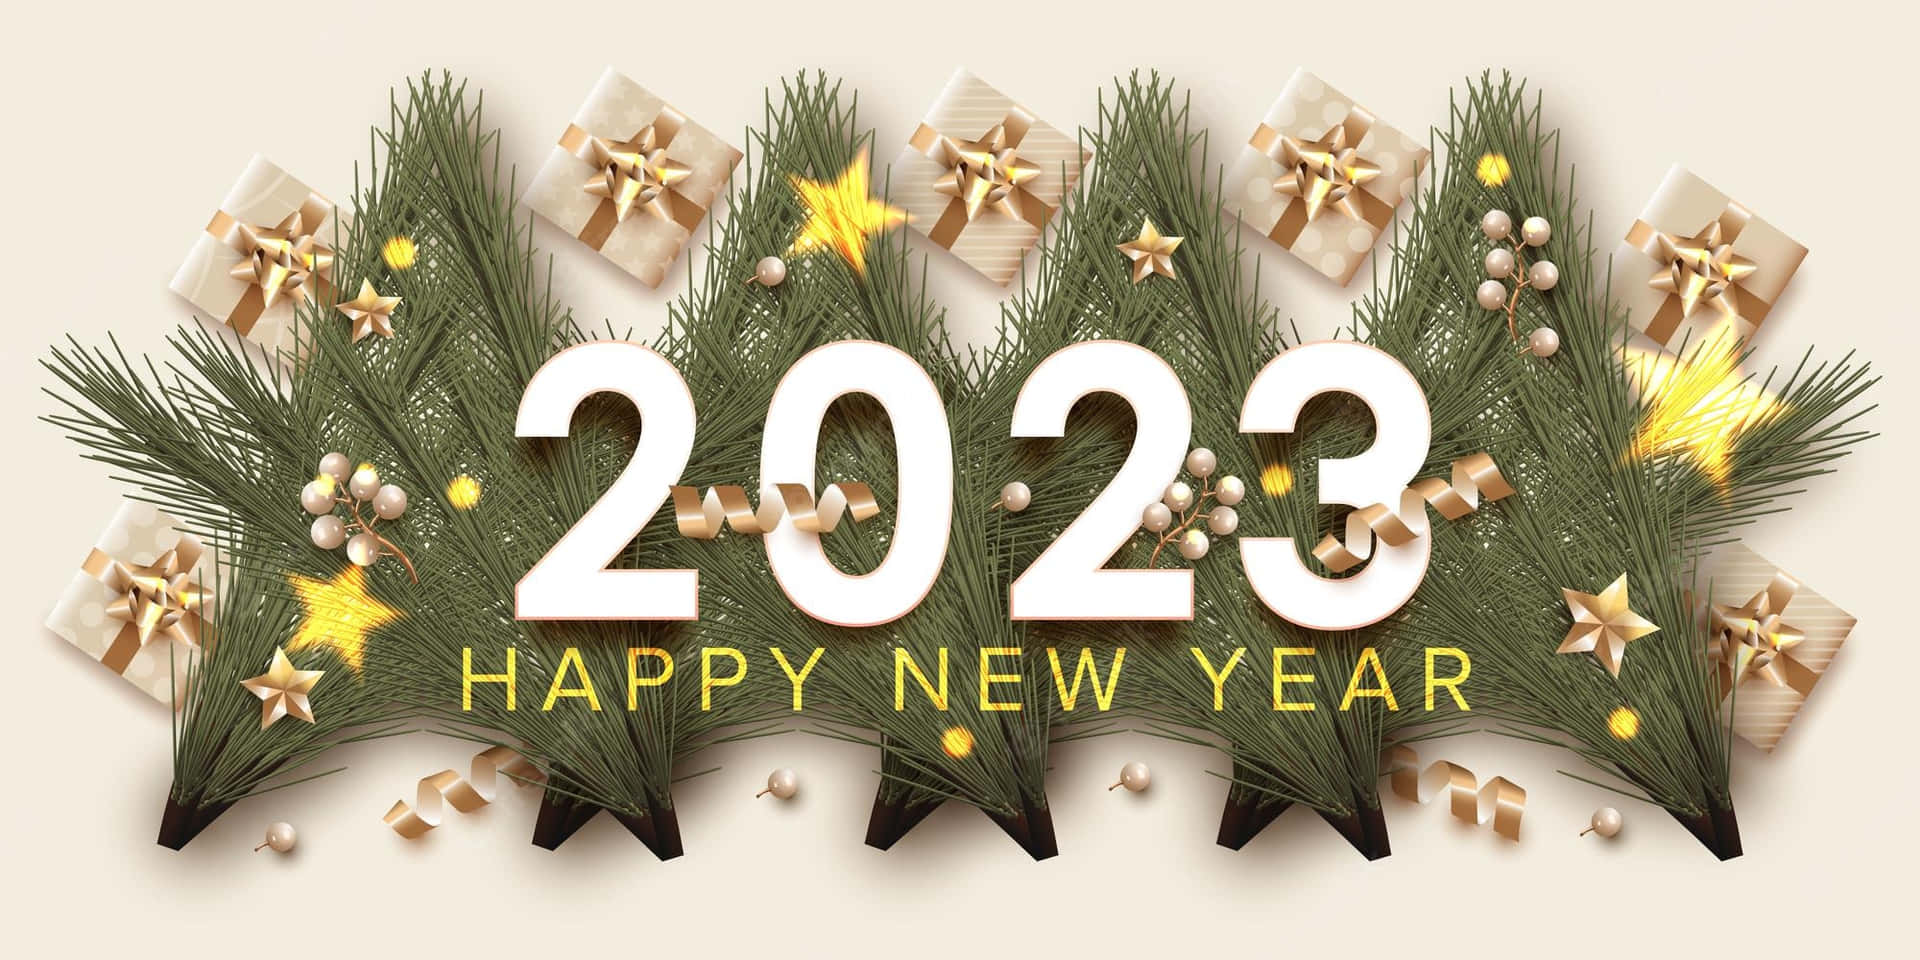 First day of 2021- Let's celebrate the new year